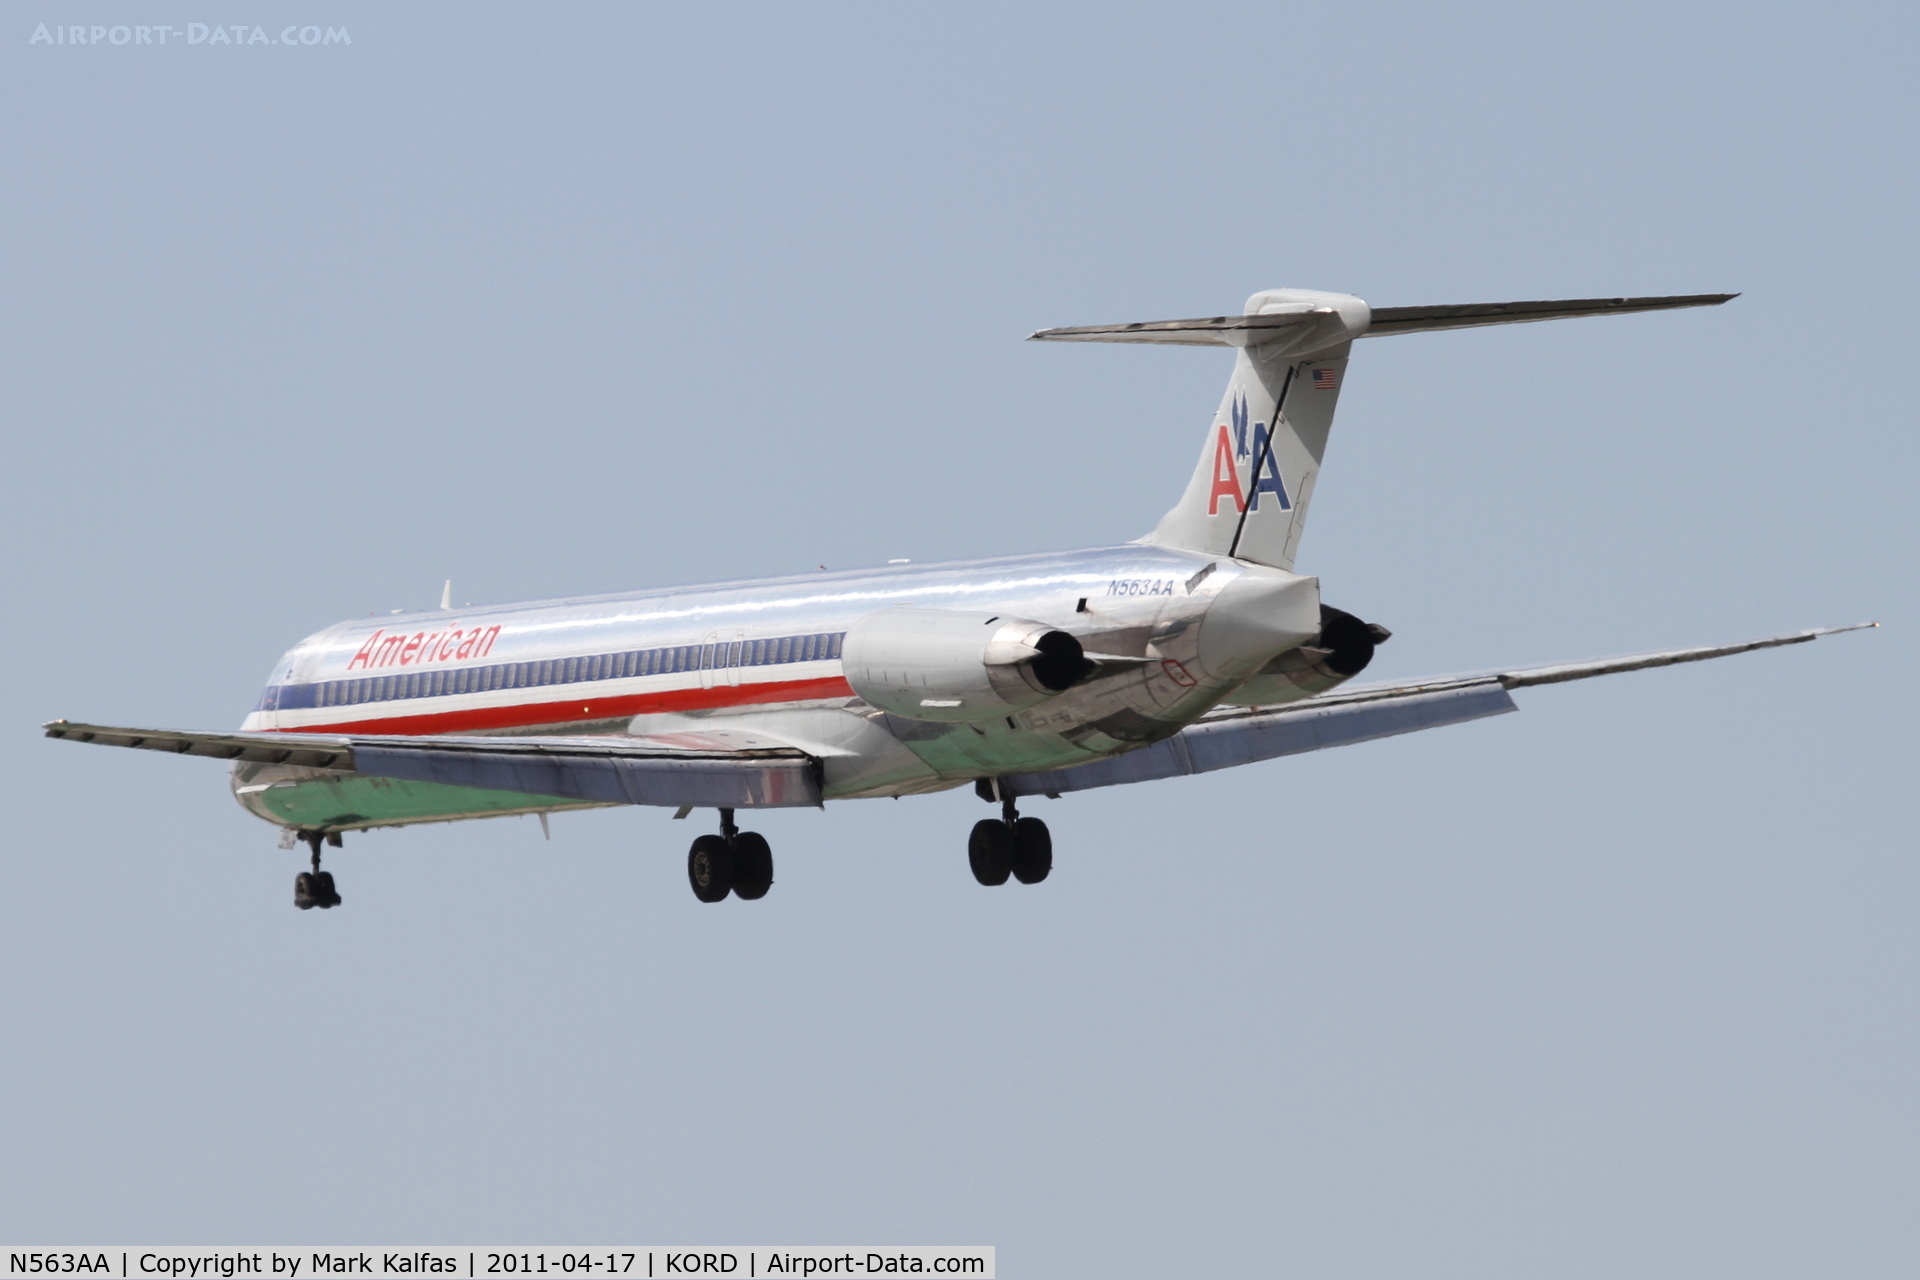 N563AA, 1987 McDonnell Douglas MD-83 (DC-9-83) C/N 49345, American Airlines McDonnell Douglas DC-9-83, AAL593 arriving from KMSP, RWY 28 approach KORD.